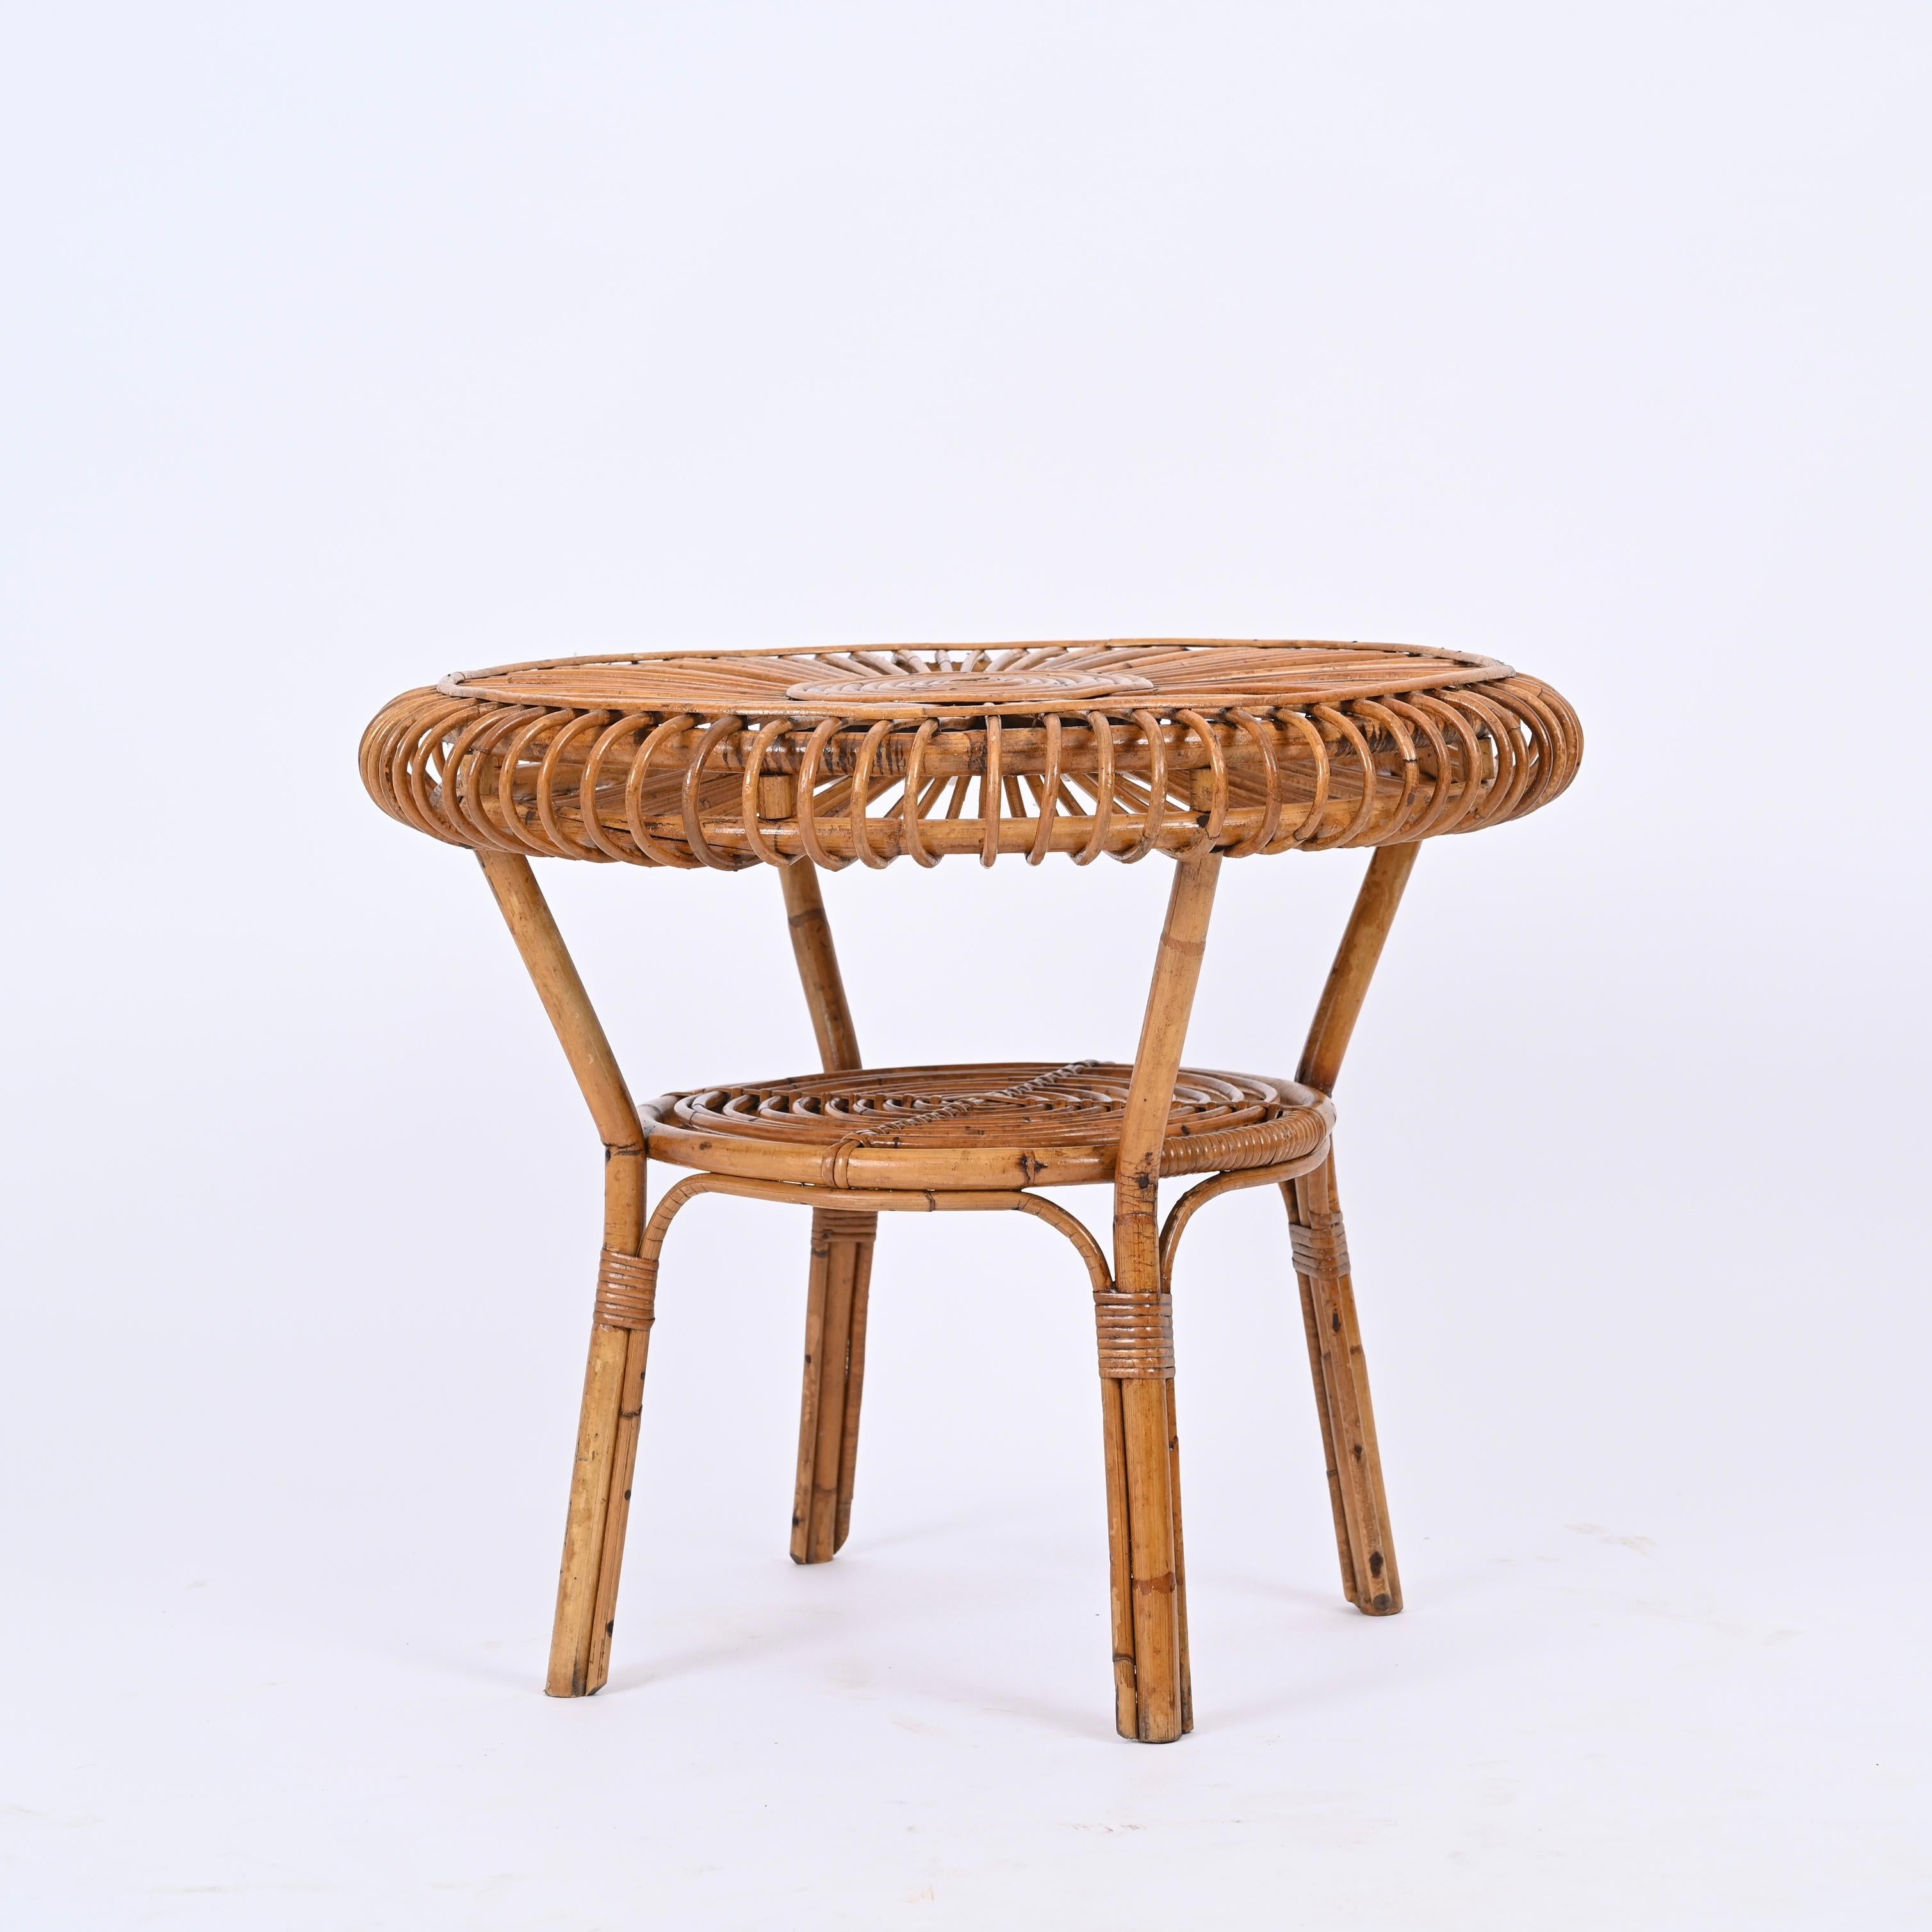 Hand-Crafted MidCentury Italian Round Coffee Table in Rattan and Bamboo, Italy 1960s For Sale